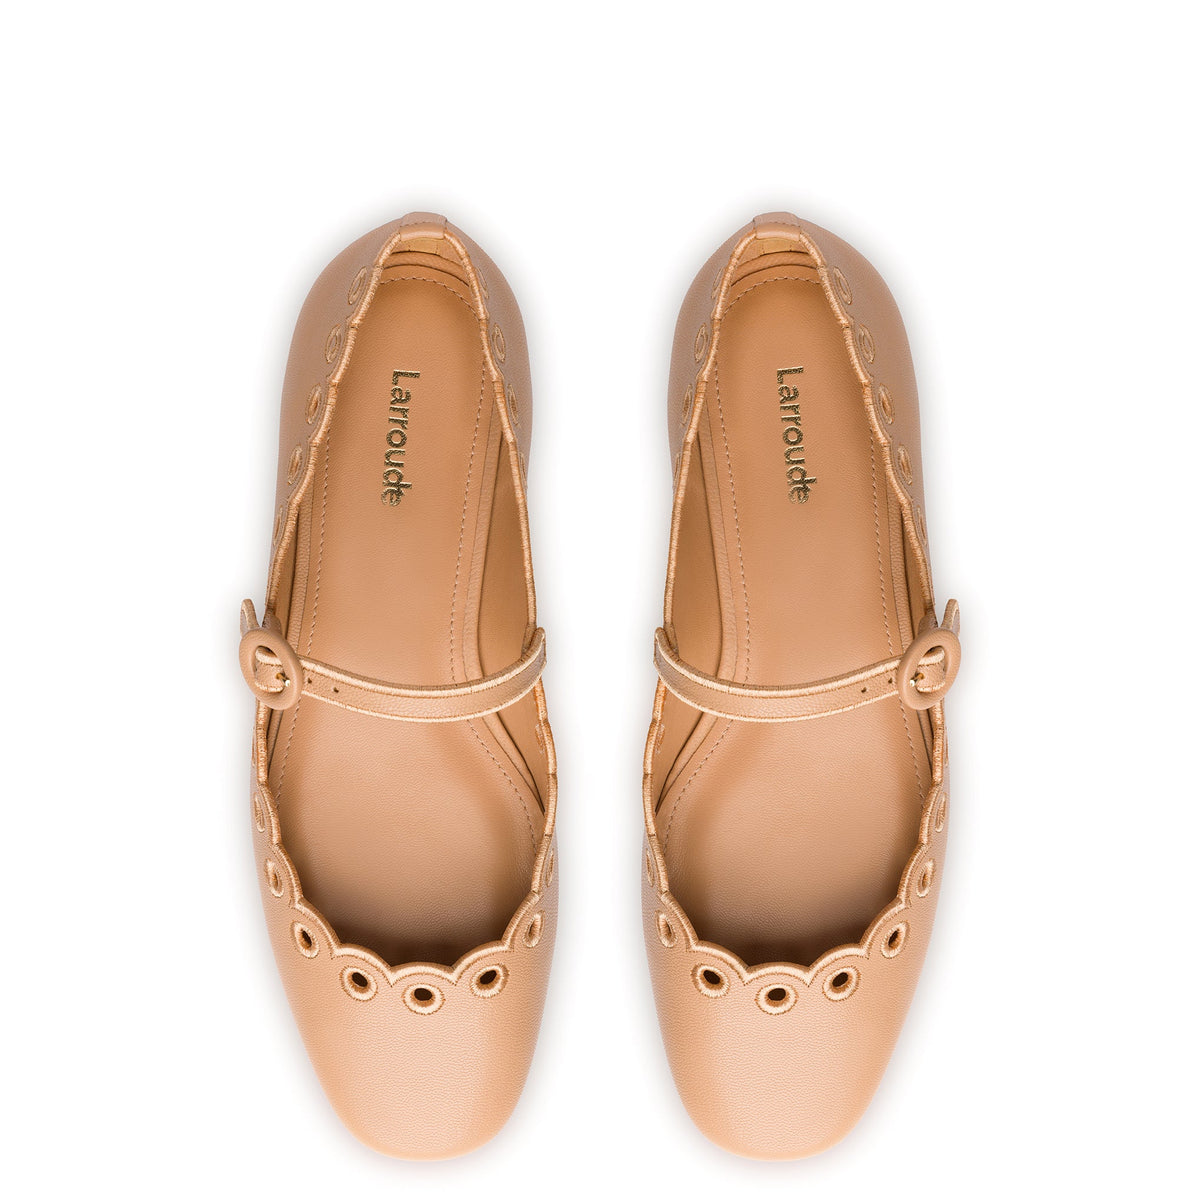 Blair Broderie Ballet Flat in Tan Leather